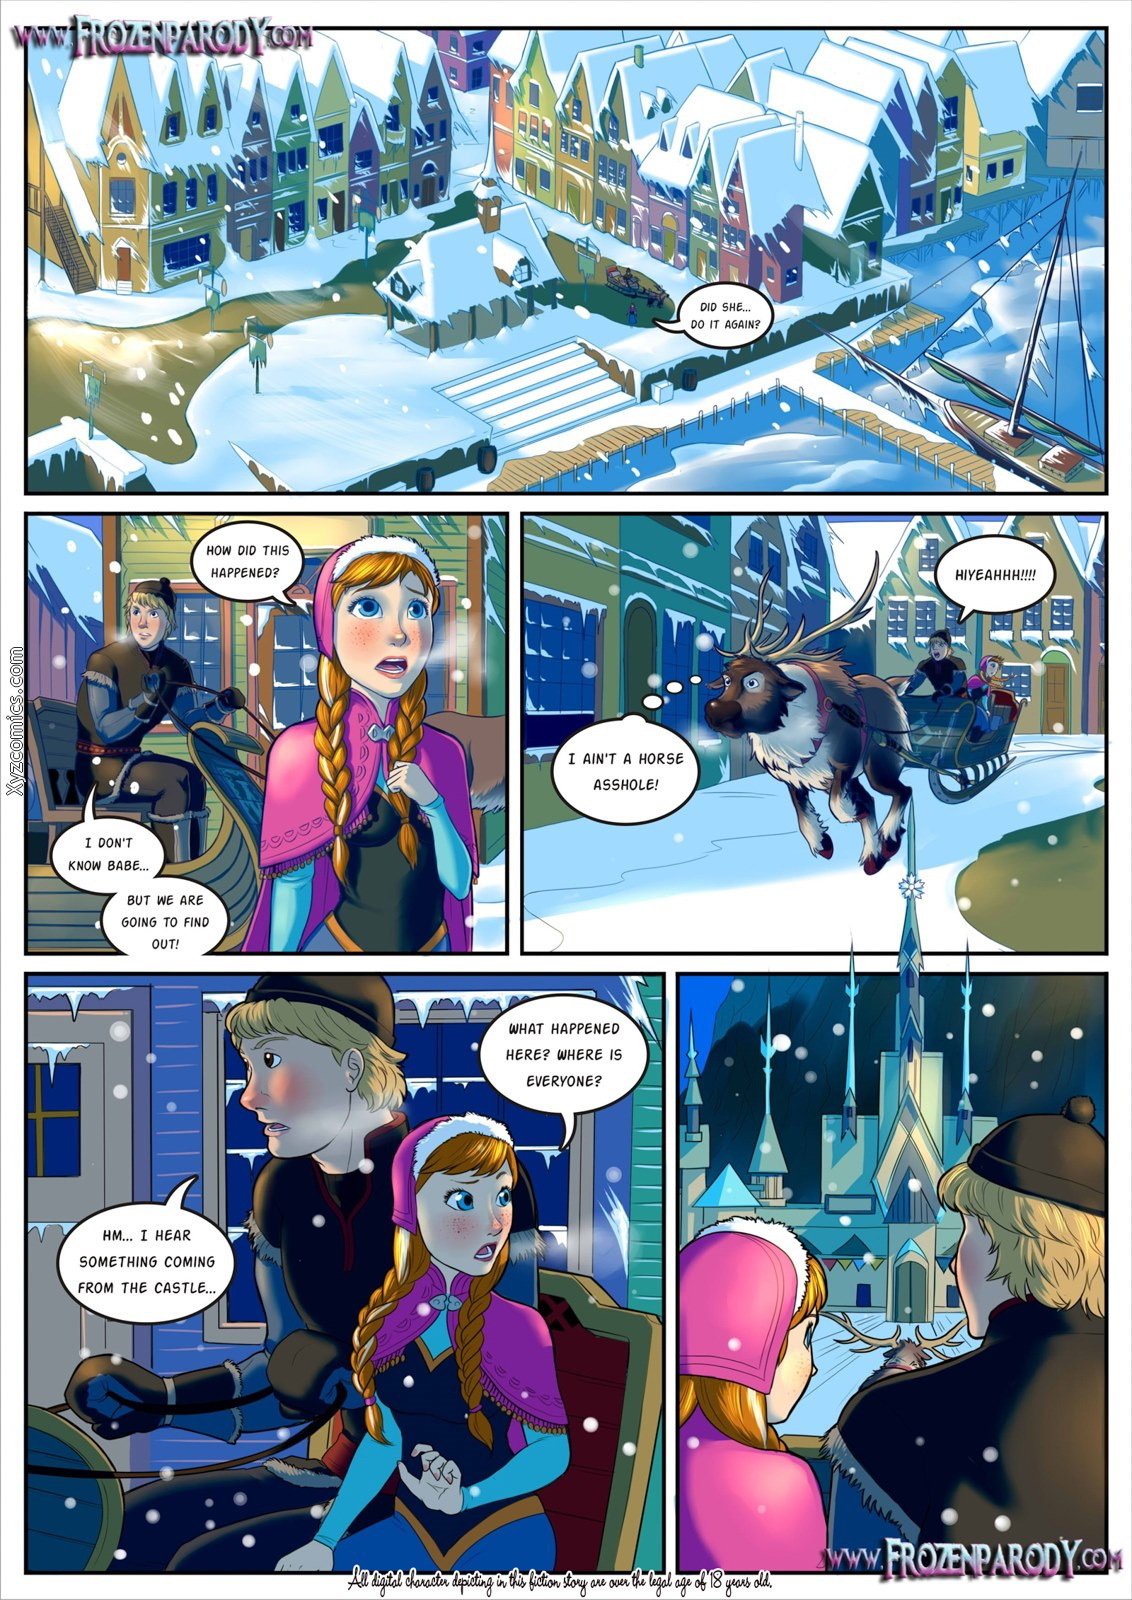 Frozen Parody 1, 2 - Page 2